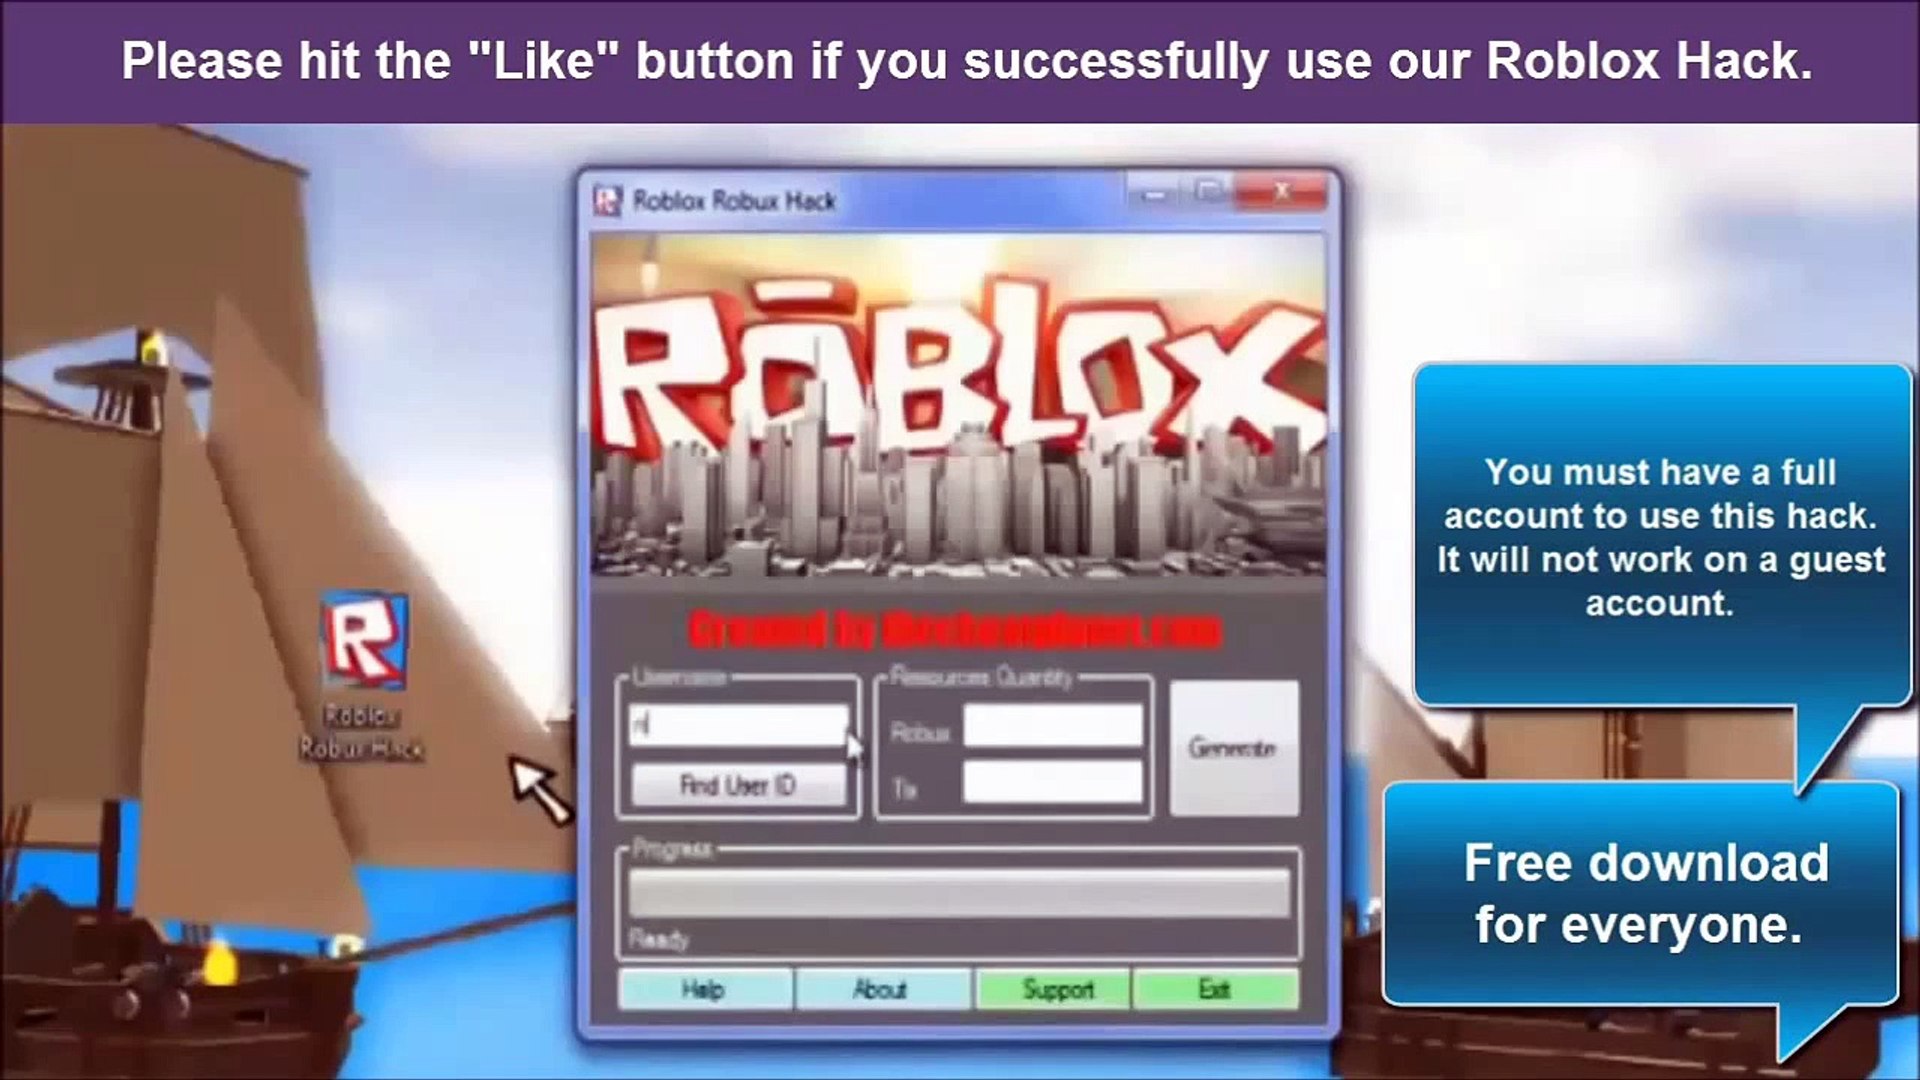 Roblox Hack Free How To Get Unlimited Roblox Robux Generator Update April 2015 Video Dailymotion